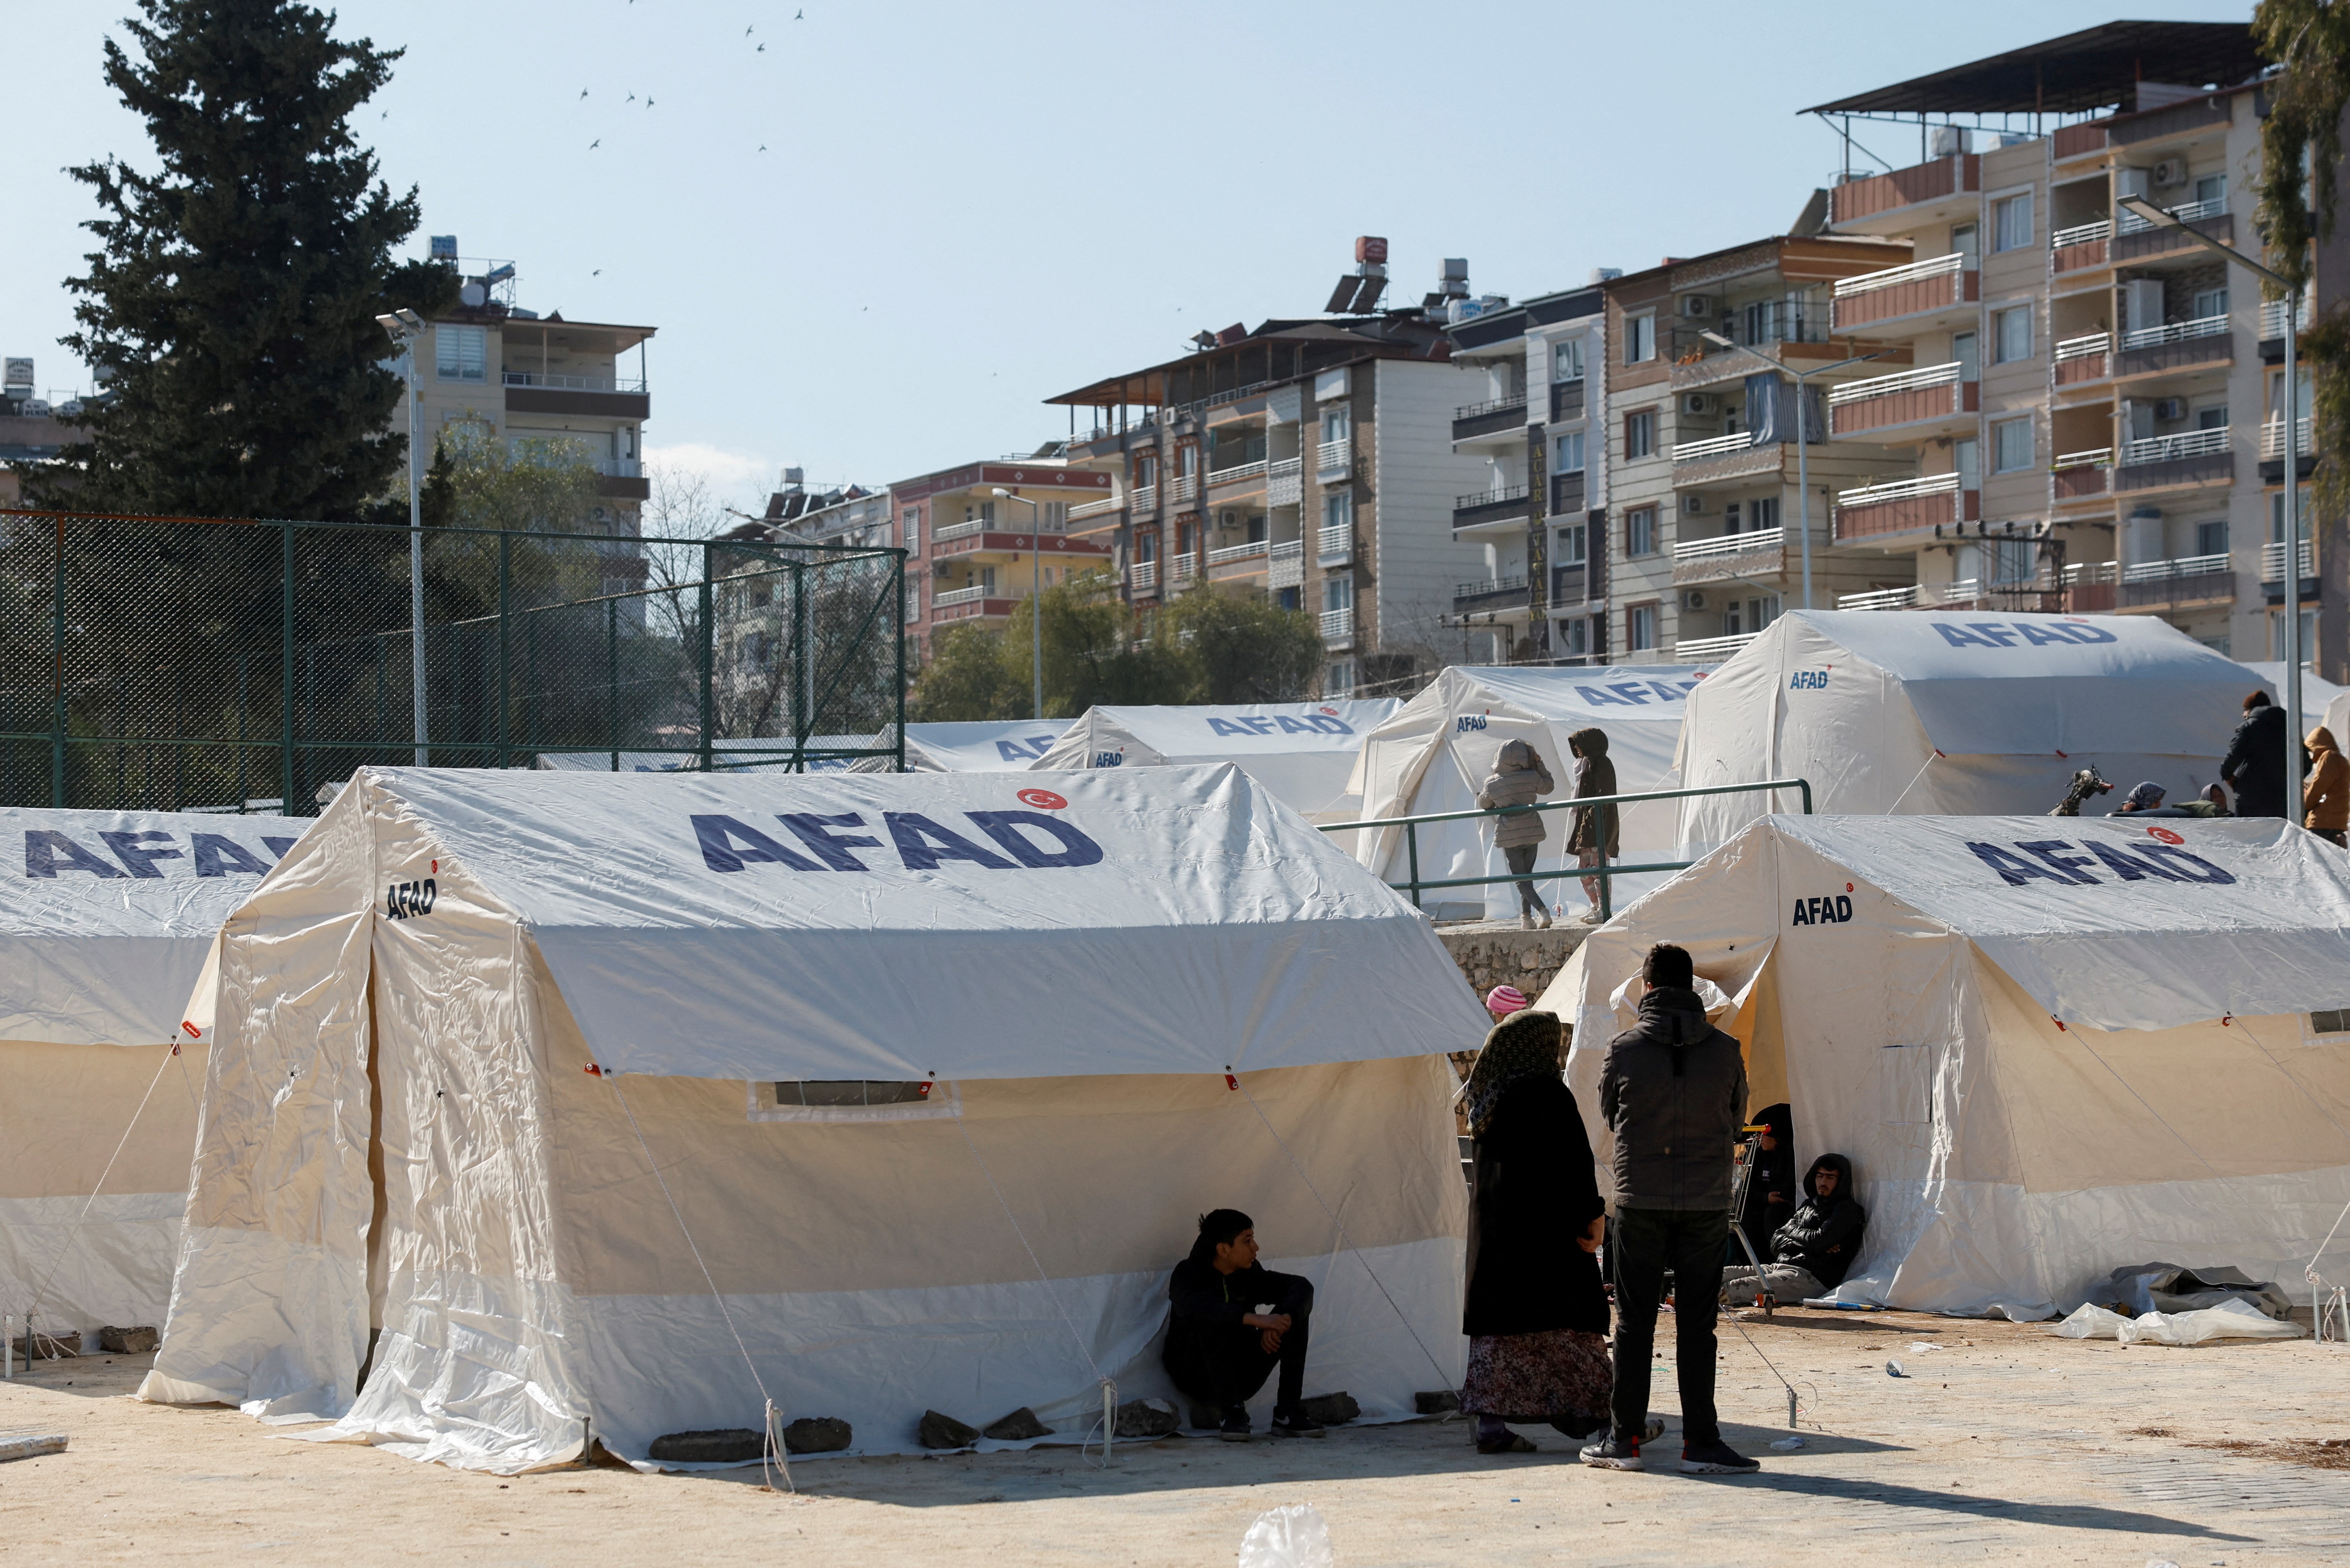 A view shows Disaster and Emergency Management Presidency's (AFAD) temporary shelter for earthquake survivors, in the aftermath of an earthquake, in Kirikhan, Turkey, February 8, 2023. Photo: Reuters